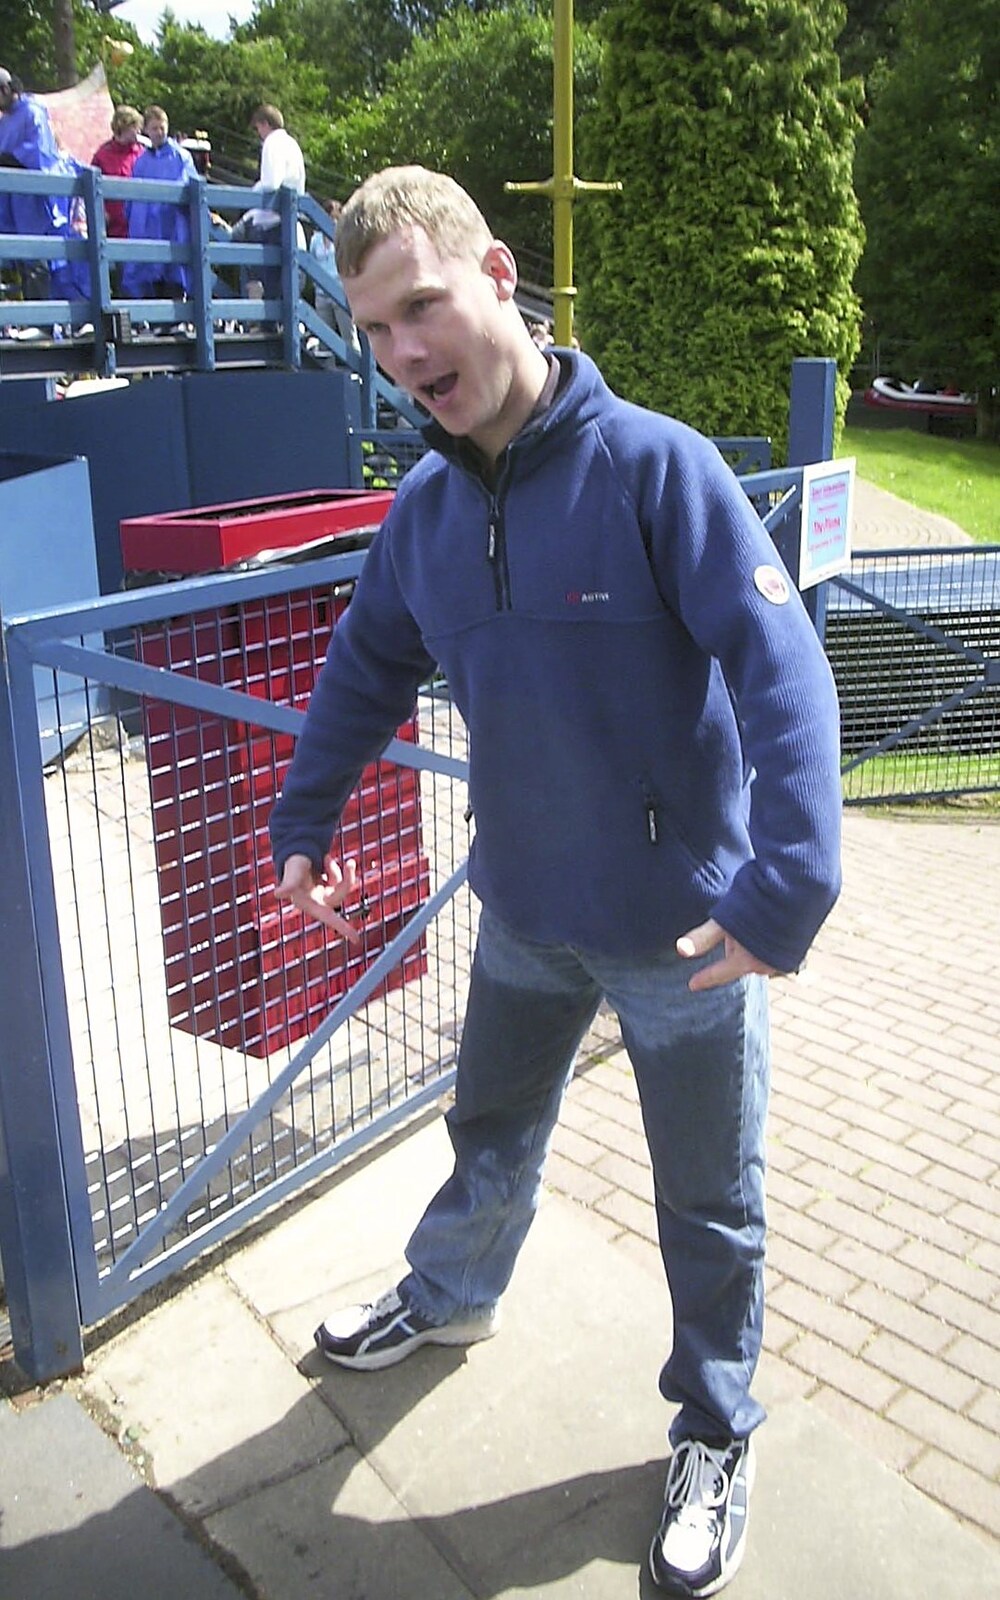 A Trip to Alton Towers, Staffordshire - 19th June 2004: Mikey P shows off his wet trousers